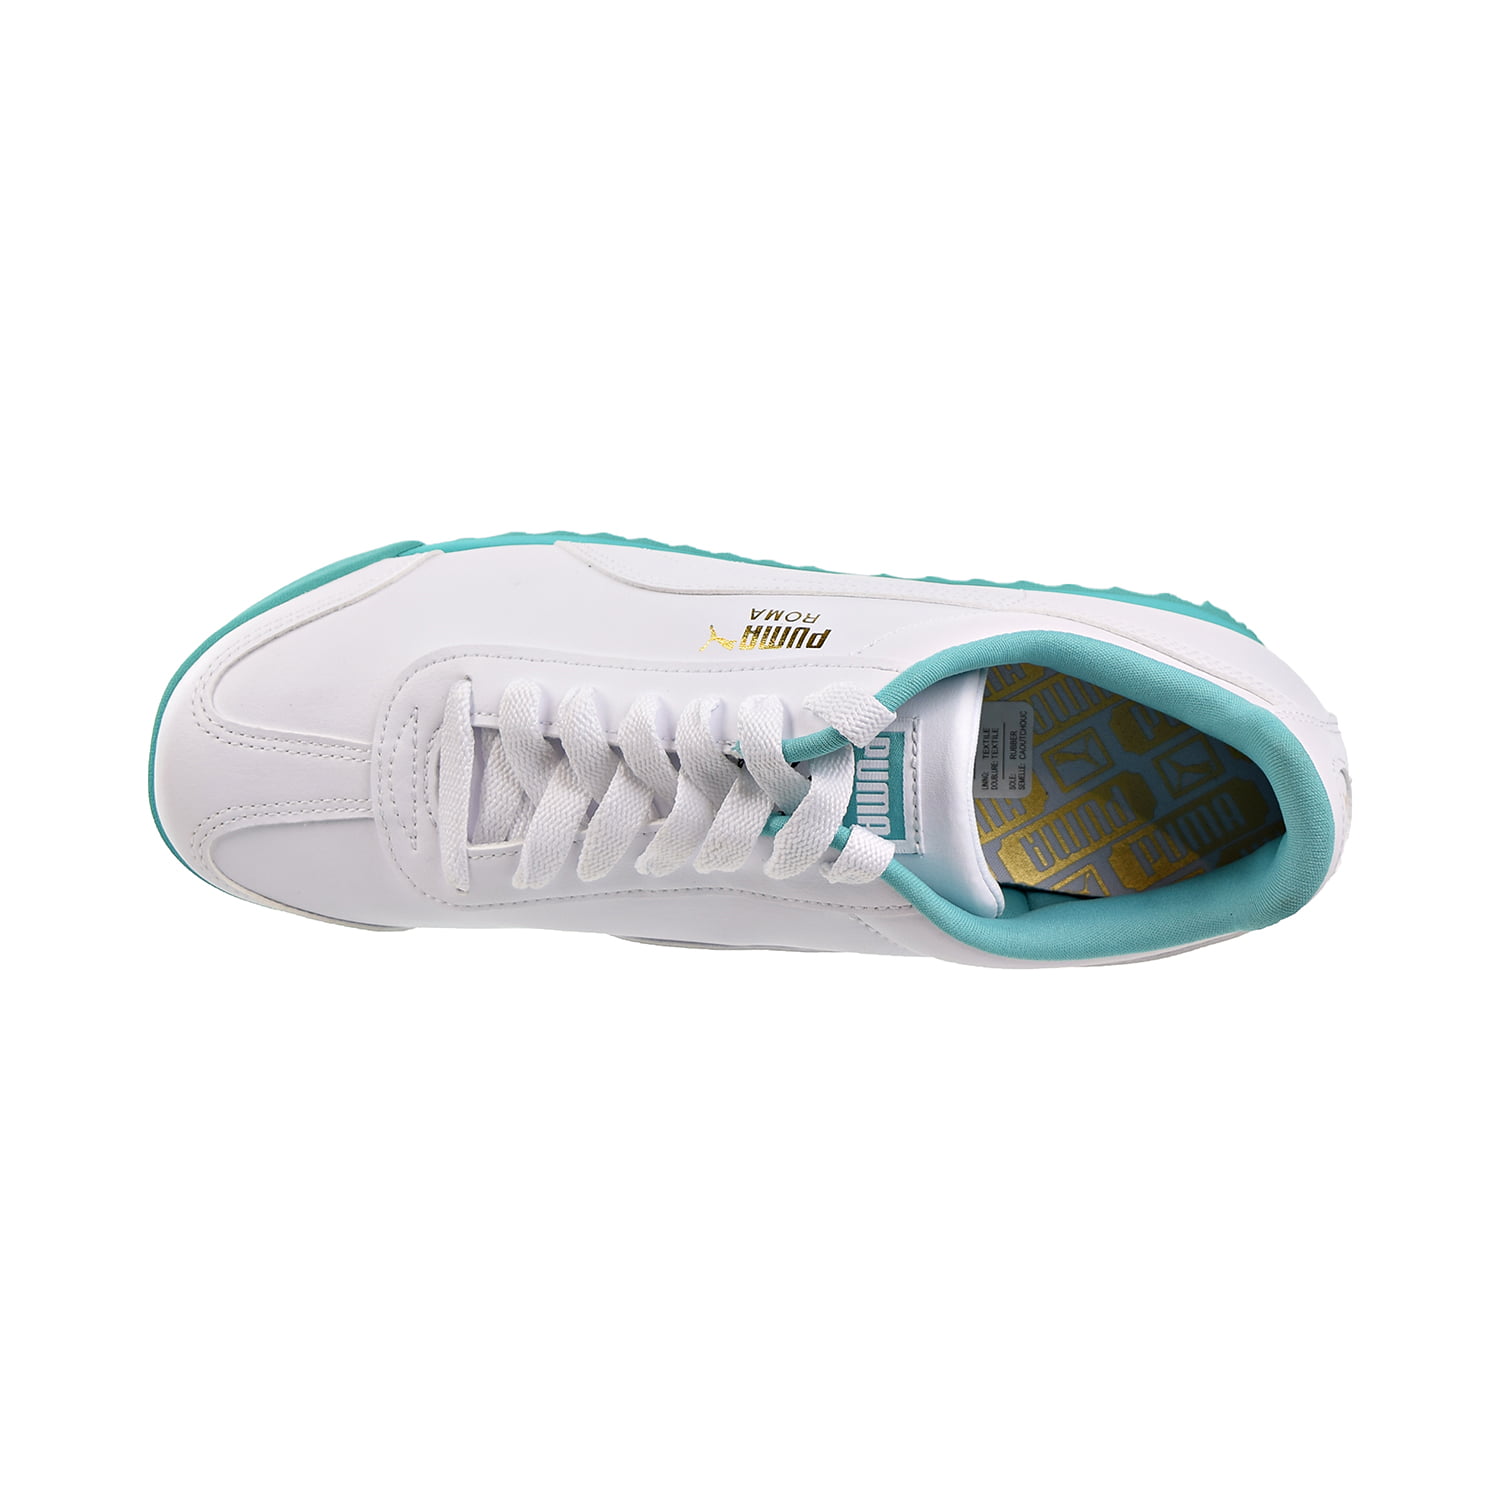 turquoise and white pumas